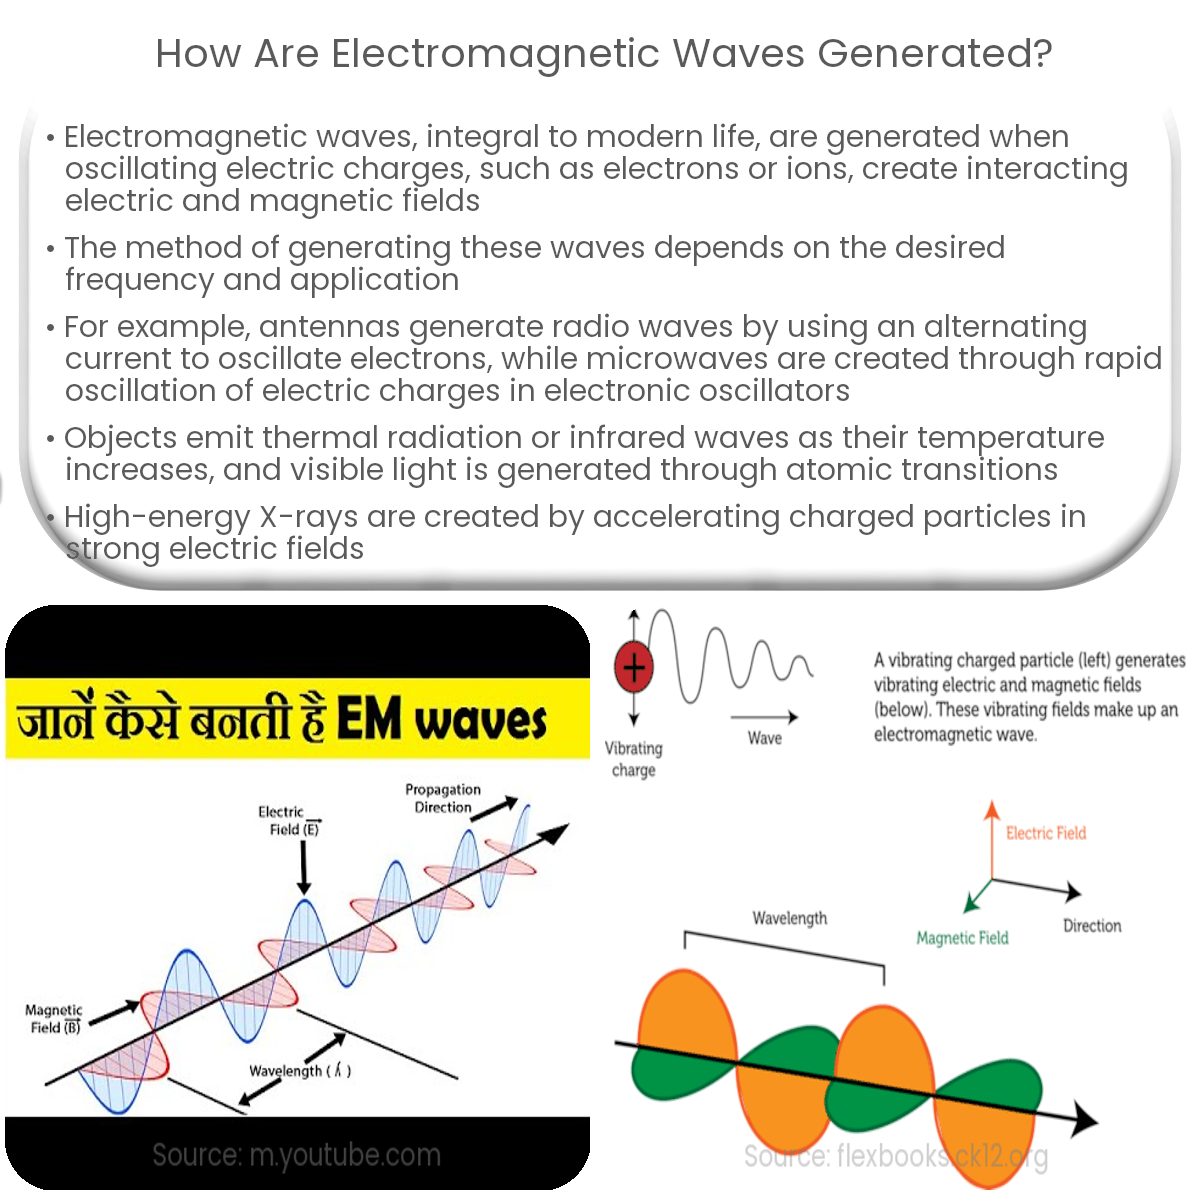 How are electromagnetic waves generated?